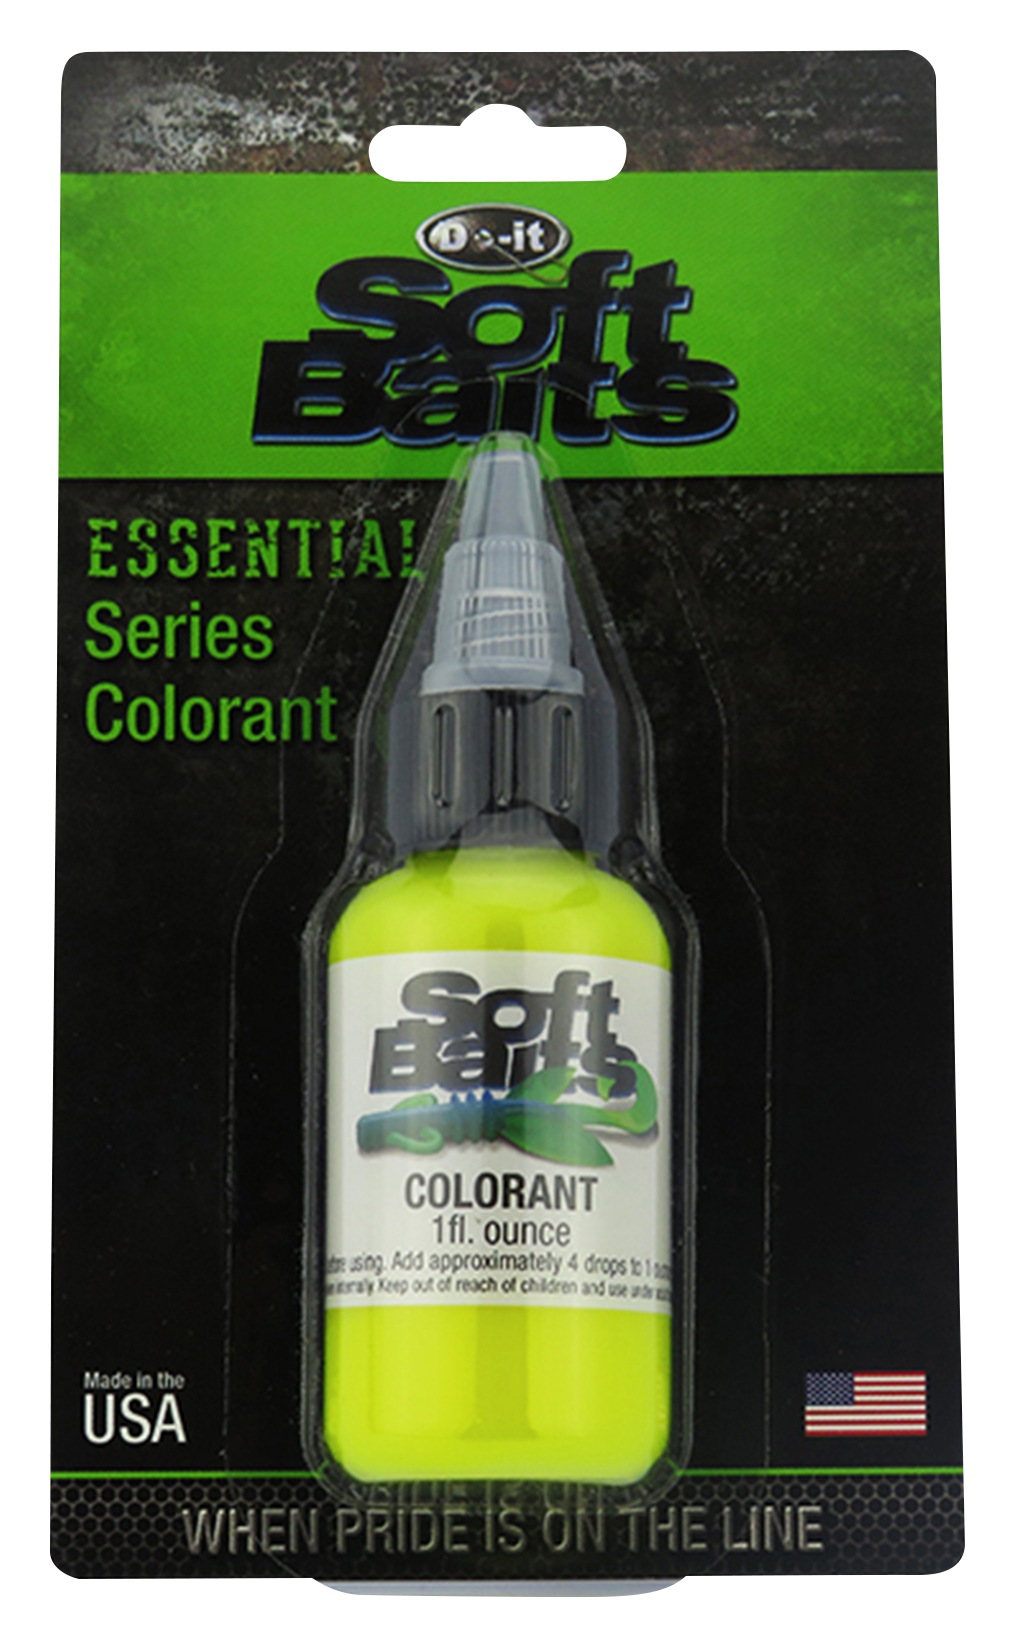 Do-it Essential Series Colorant Chartreuse